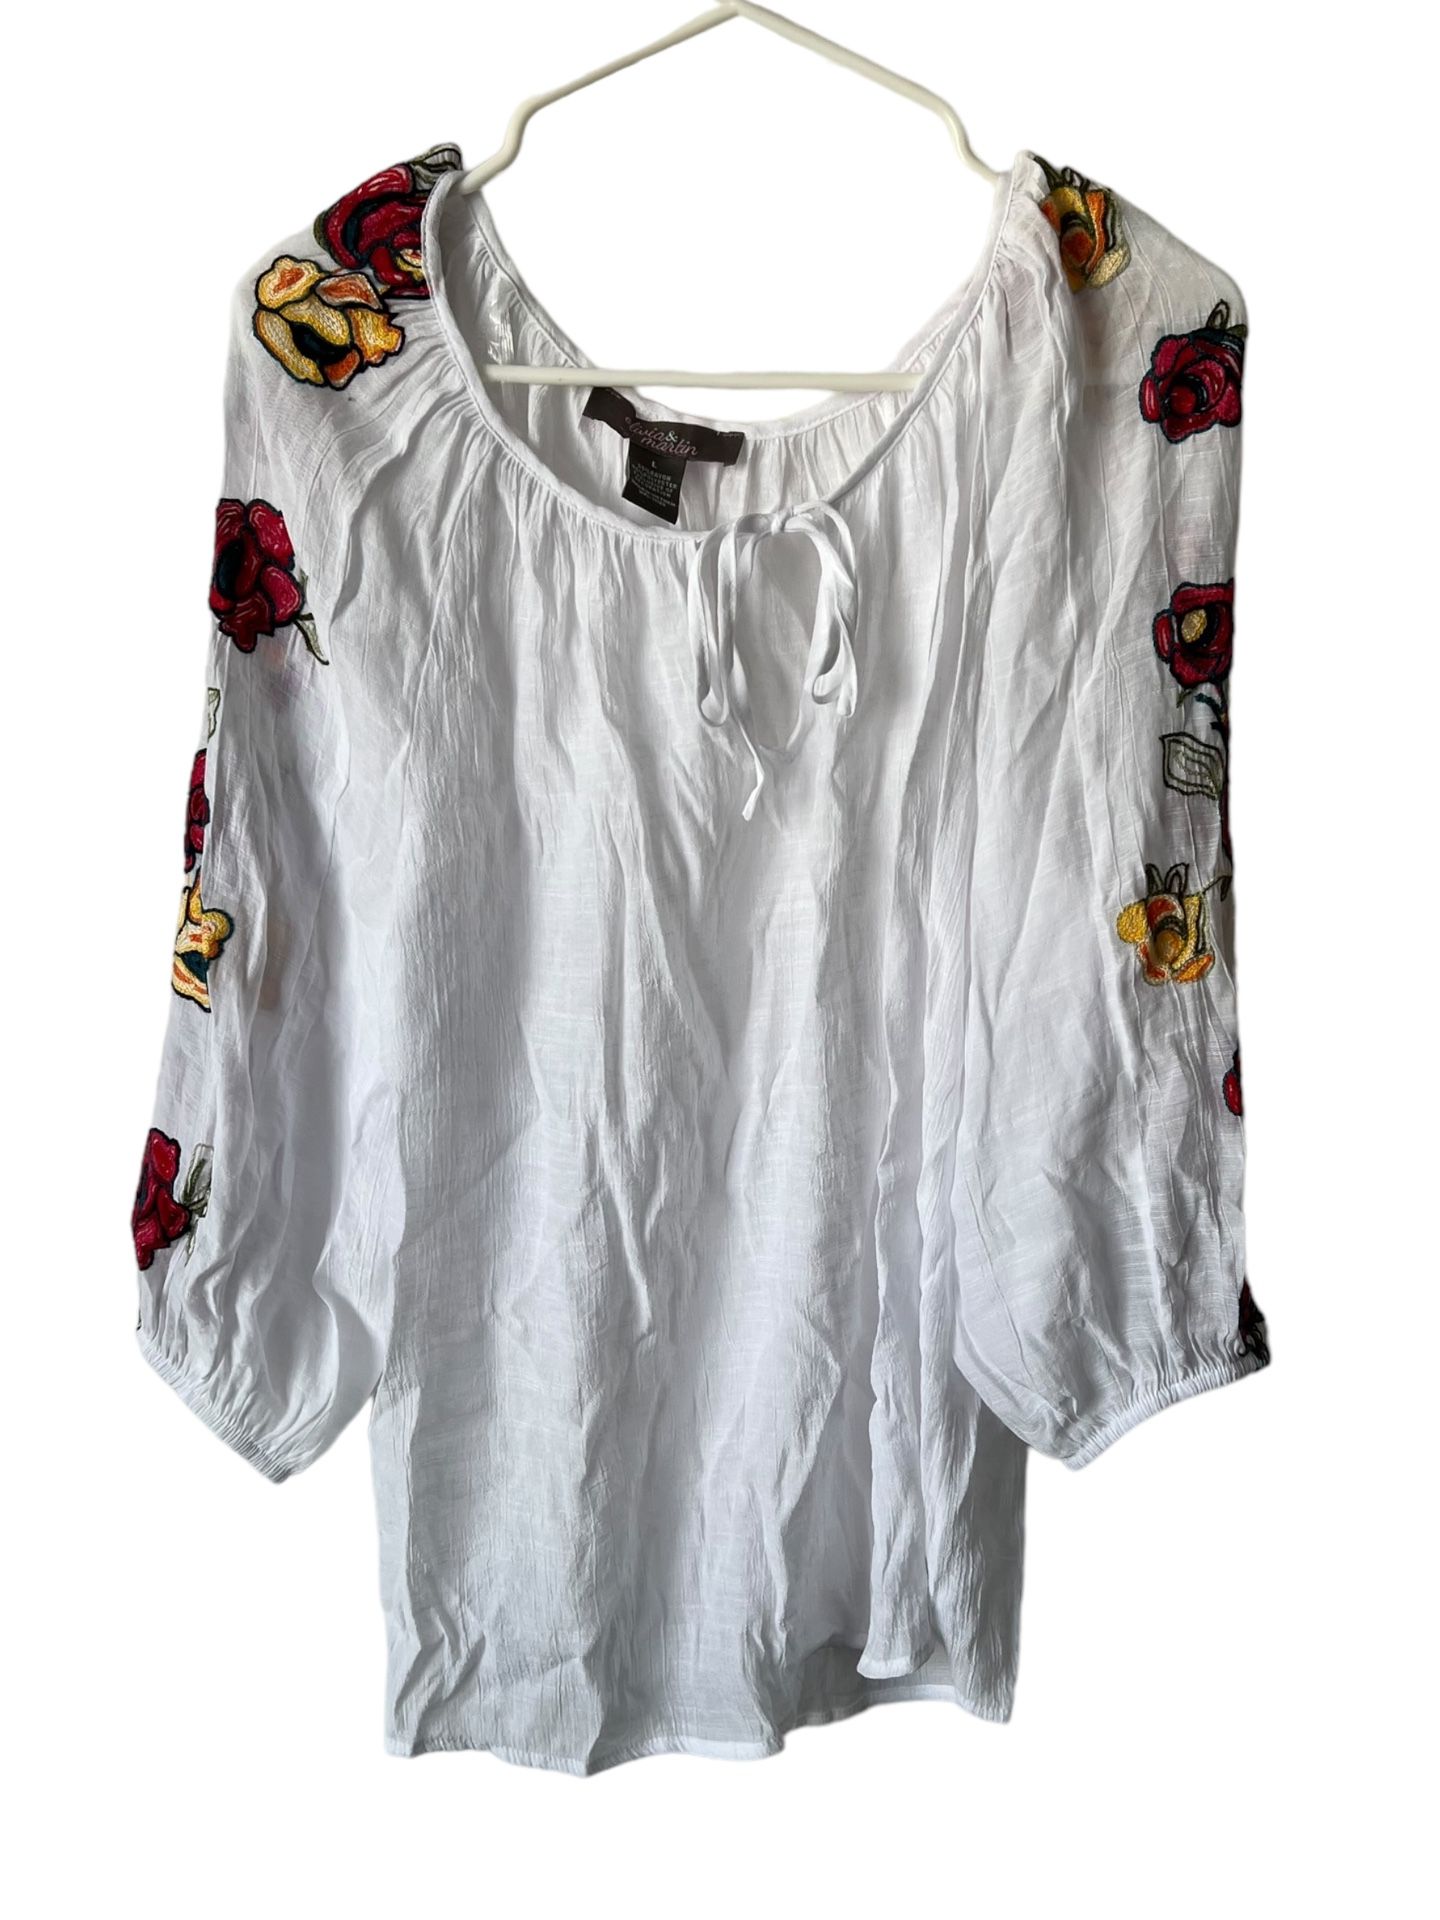 New Olivia & Martin Peasant Blouse Tunic White Floral Silky Top Large Embroidere  Introducing a beautiful peasant blouse tunic from Olivia & Martin! T